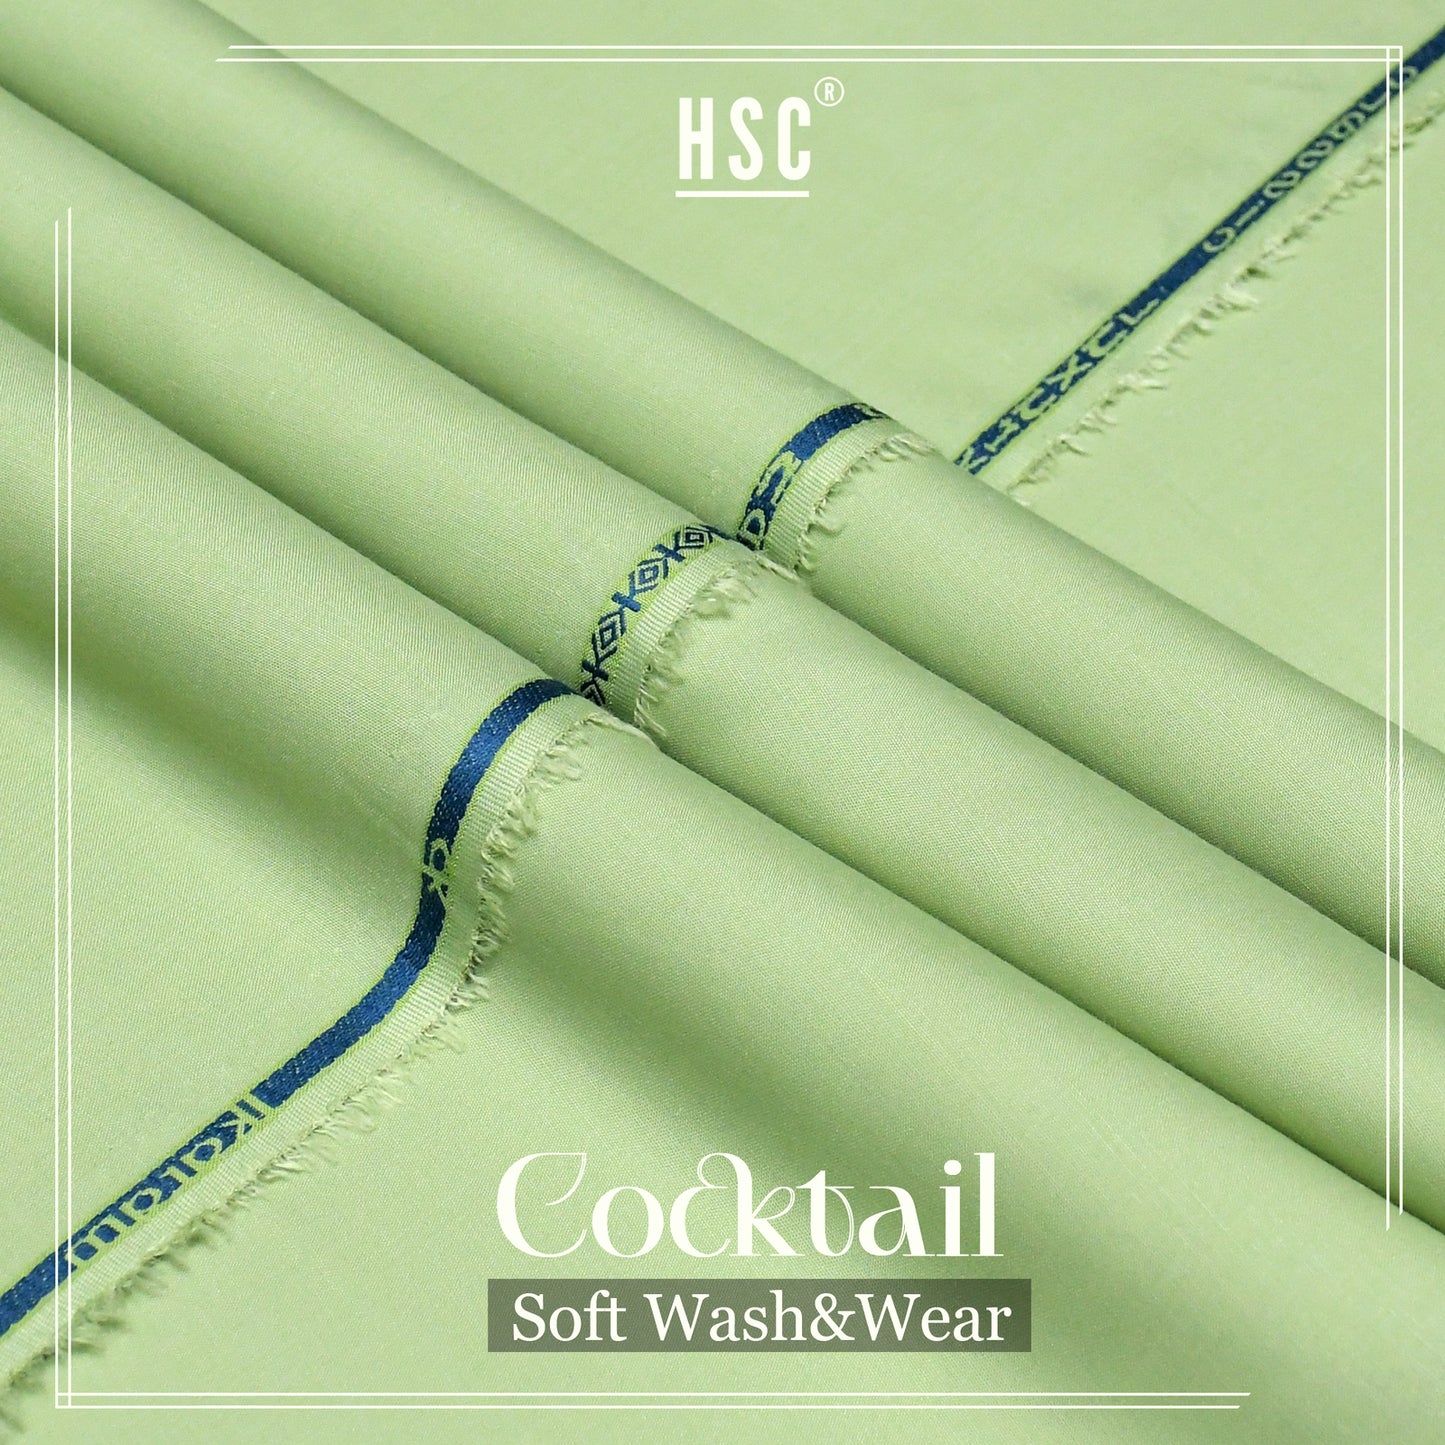 Buy 1 Get 1 Free Cocktail Soft Wash&Wear - CSW10 HSC BLENDED